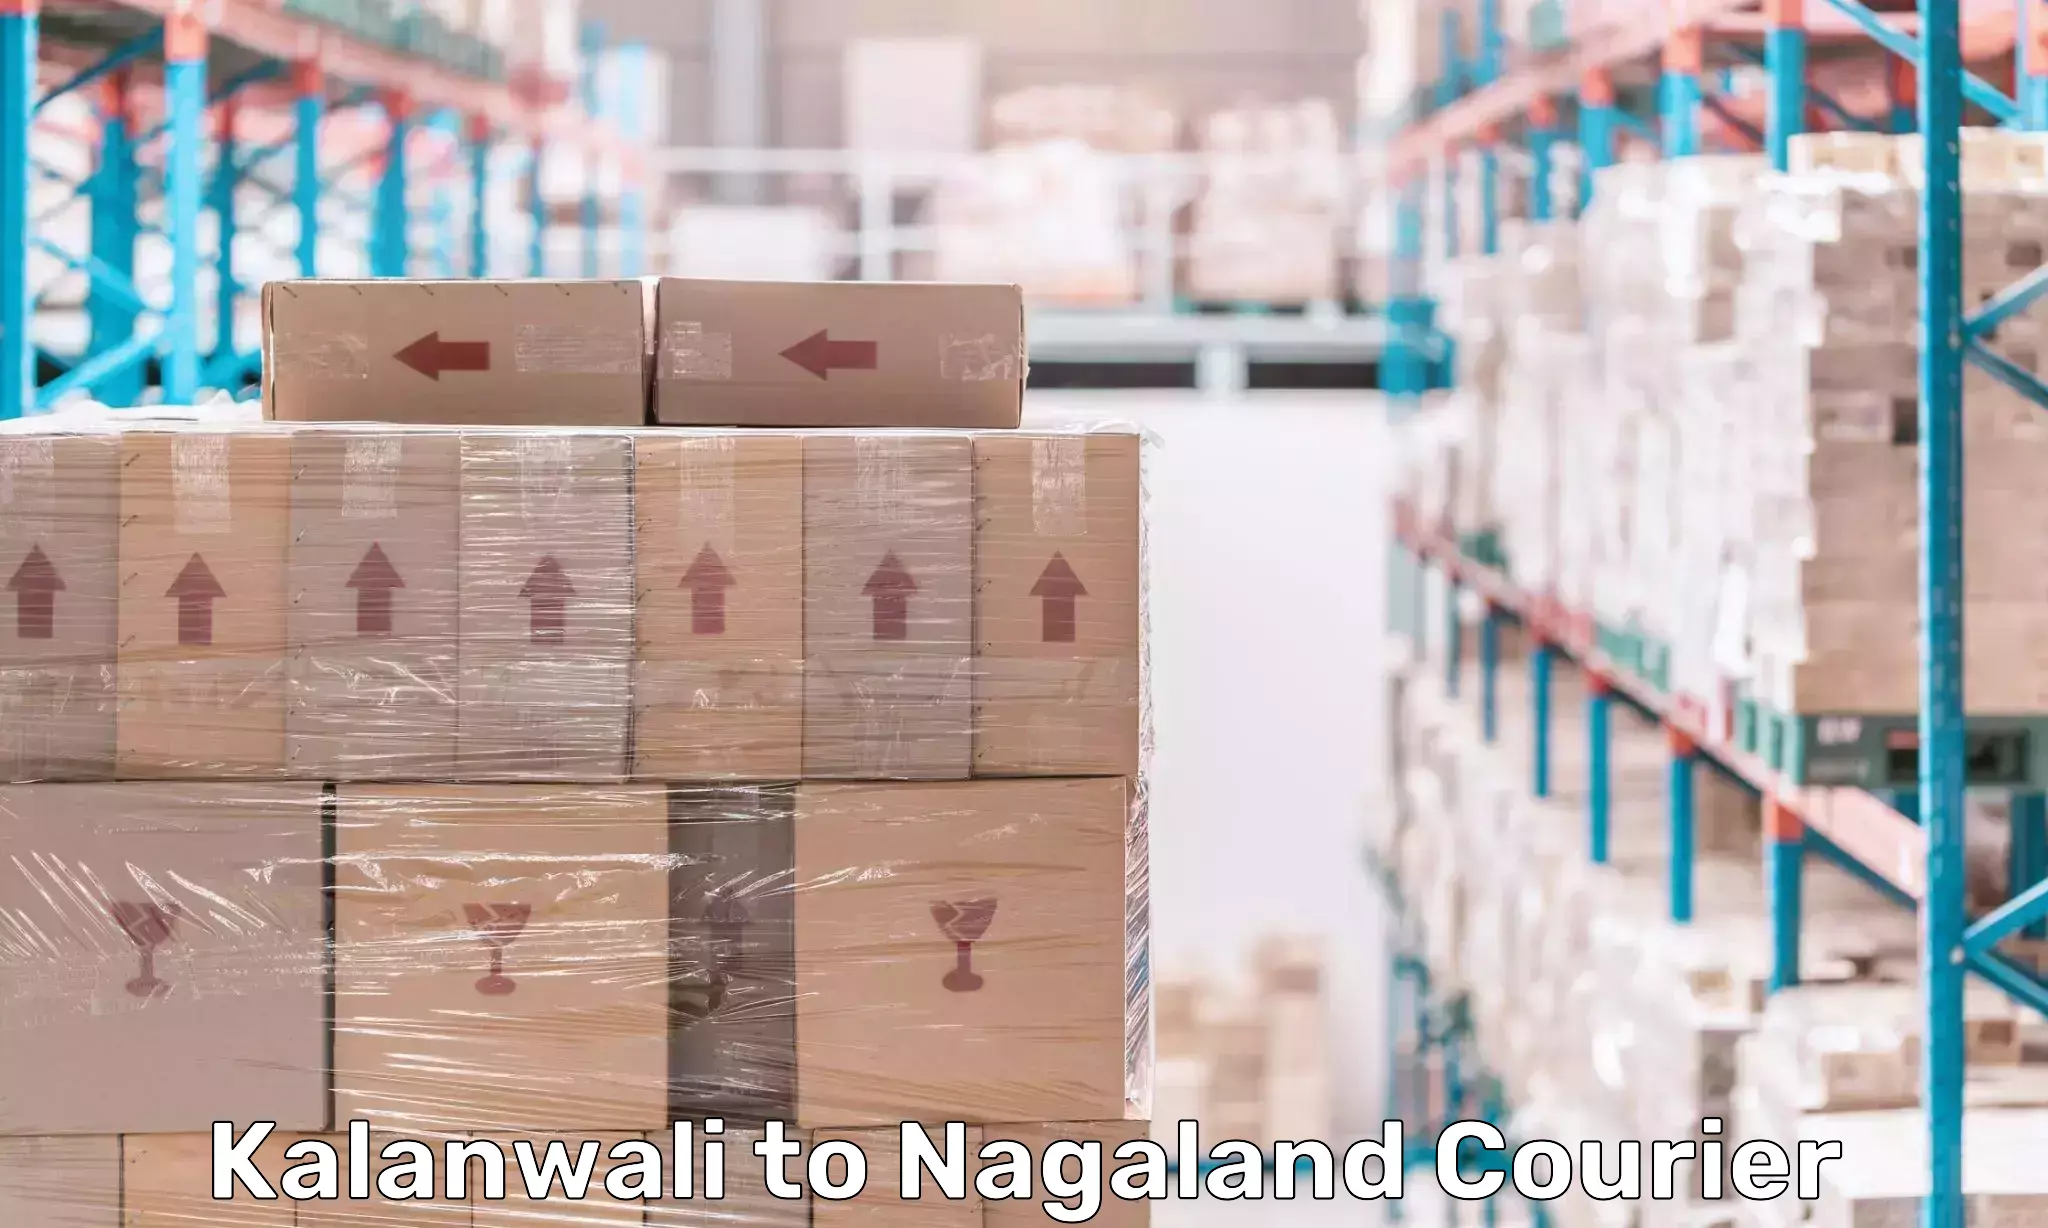 Full-service courier options in Kalanwali to Nagaland